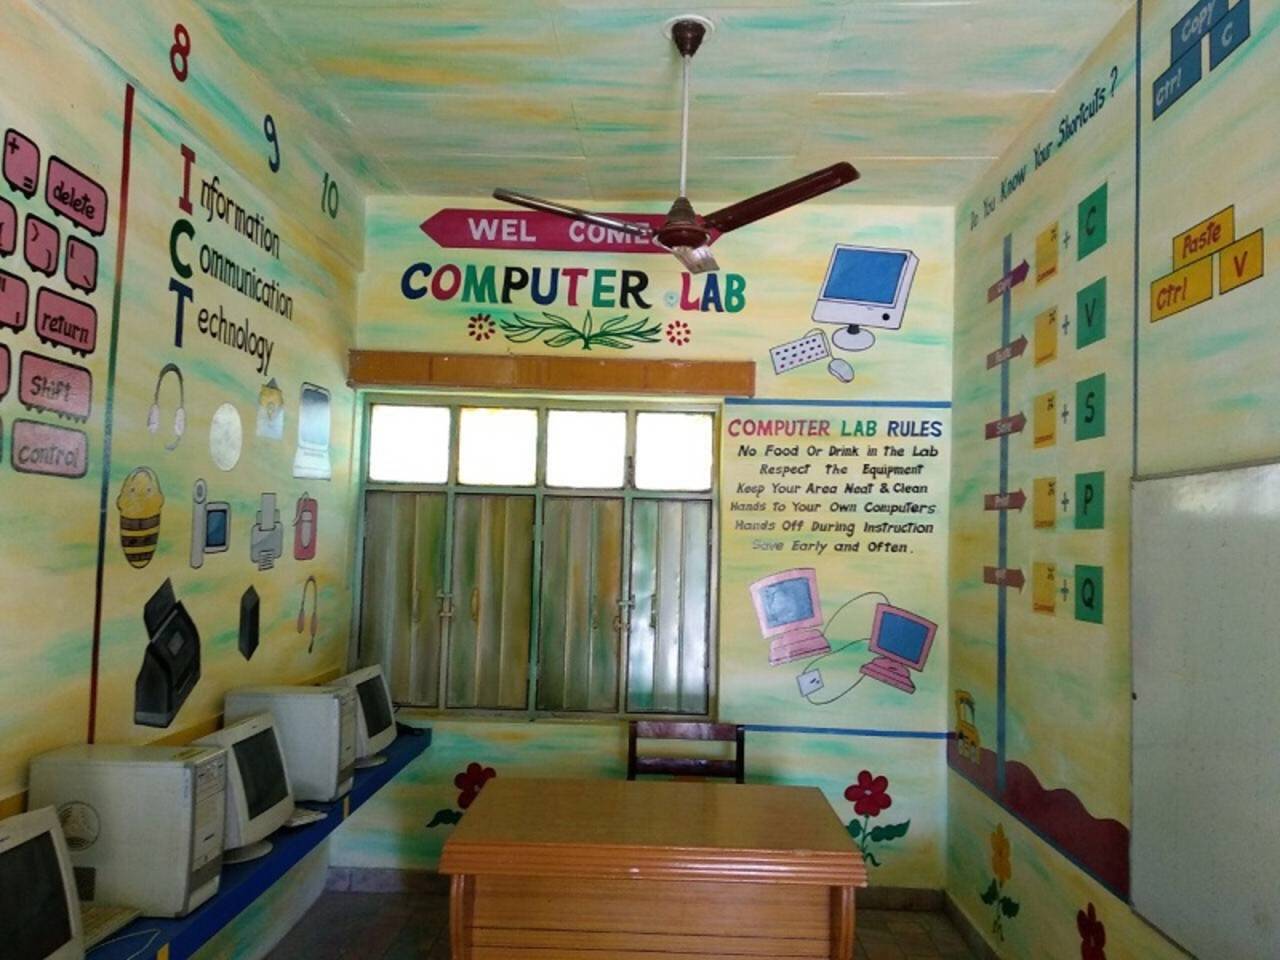 Technology Themed Decor for Classroom or Computer Lab